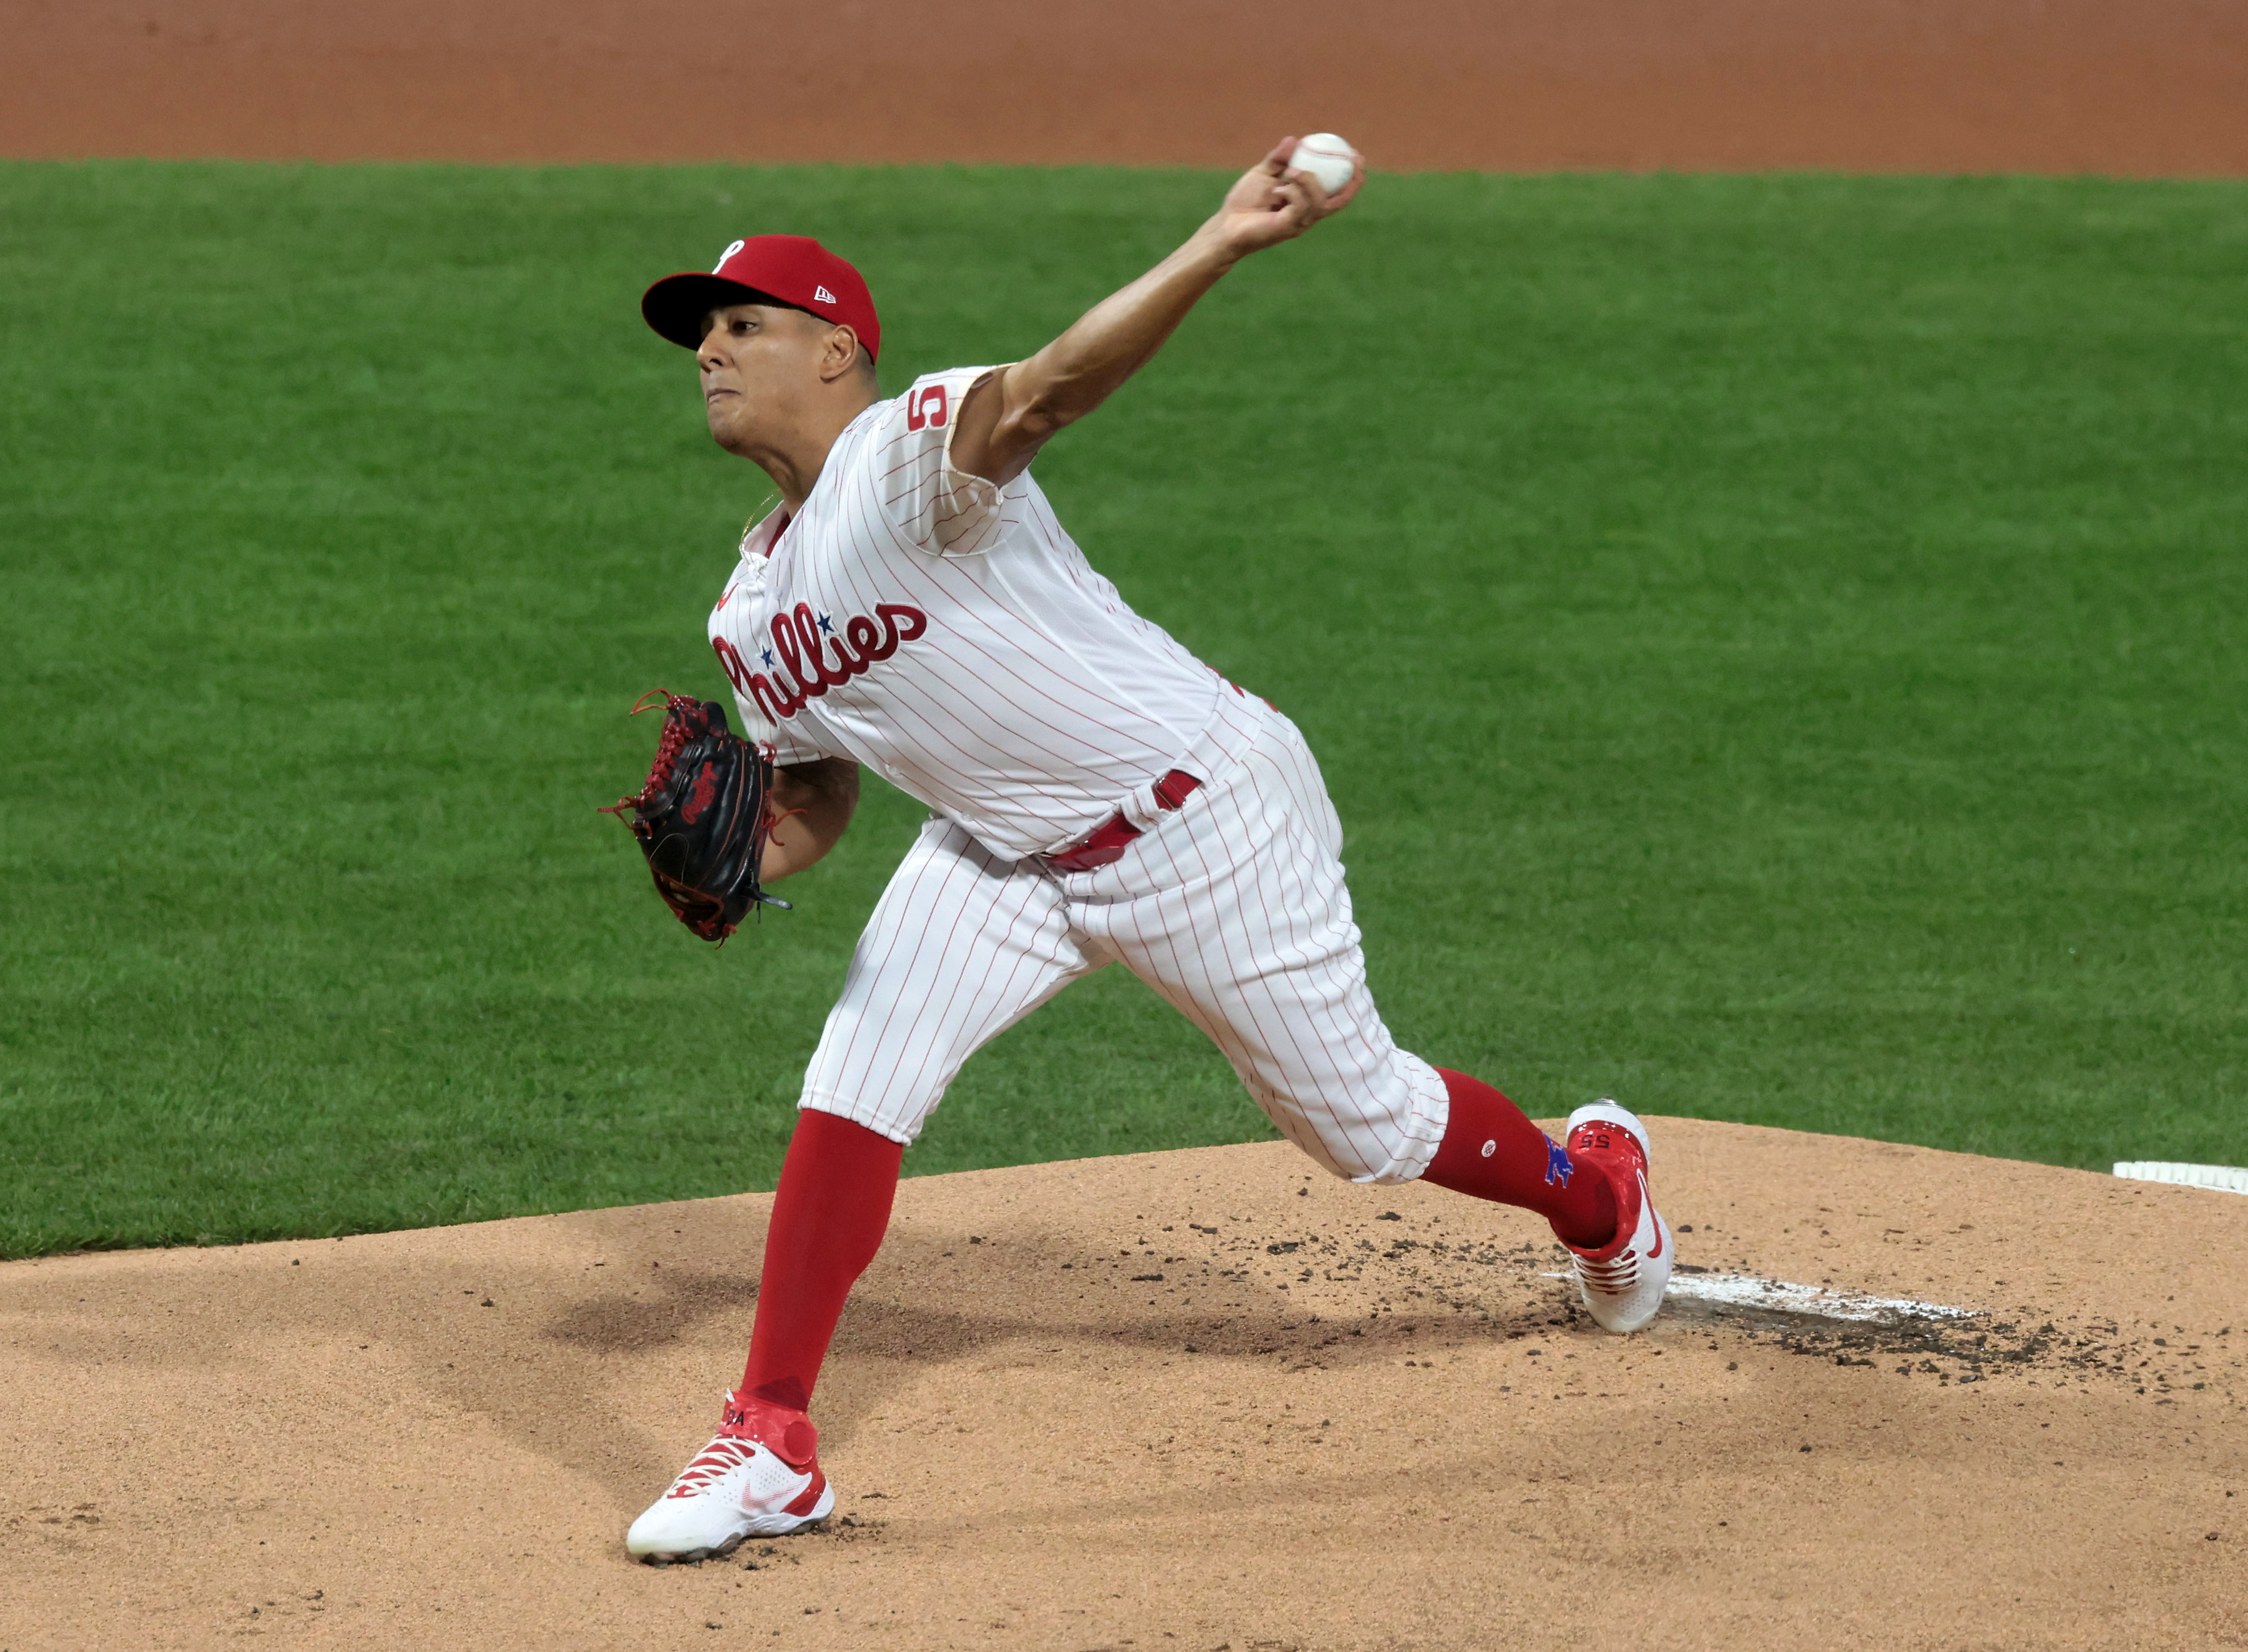 Ranger Suarez (55) of the Philadelphia Phillies pitches vs. the Houston Astros in the first inning during Game 3 of the World Series at Citizens Bank Park, Tuesday, Nov. 1 2022.